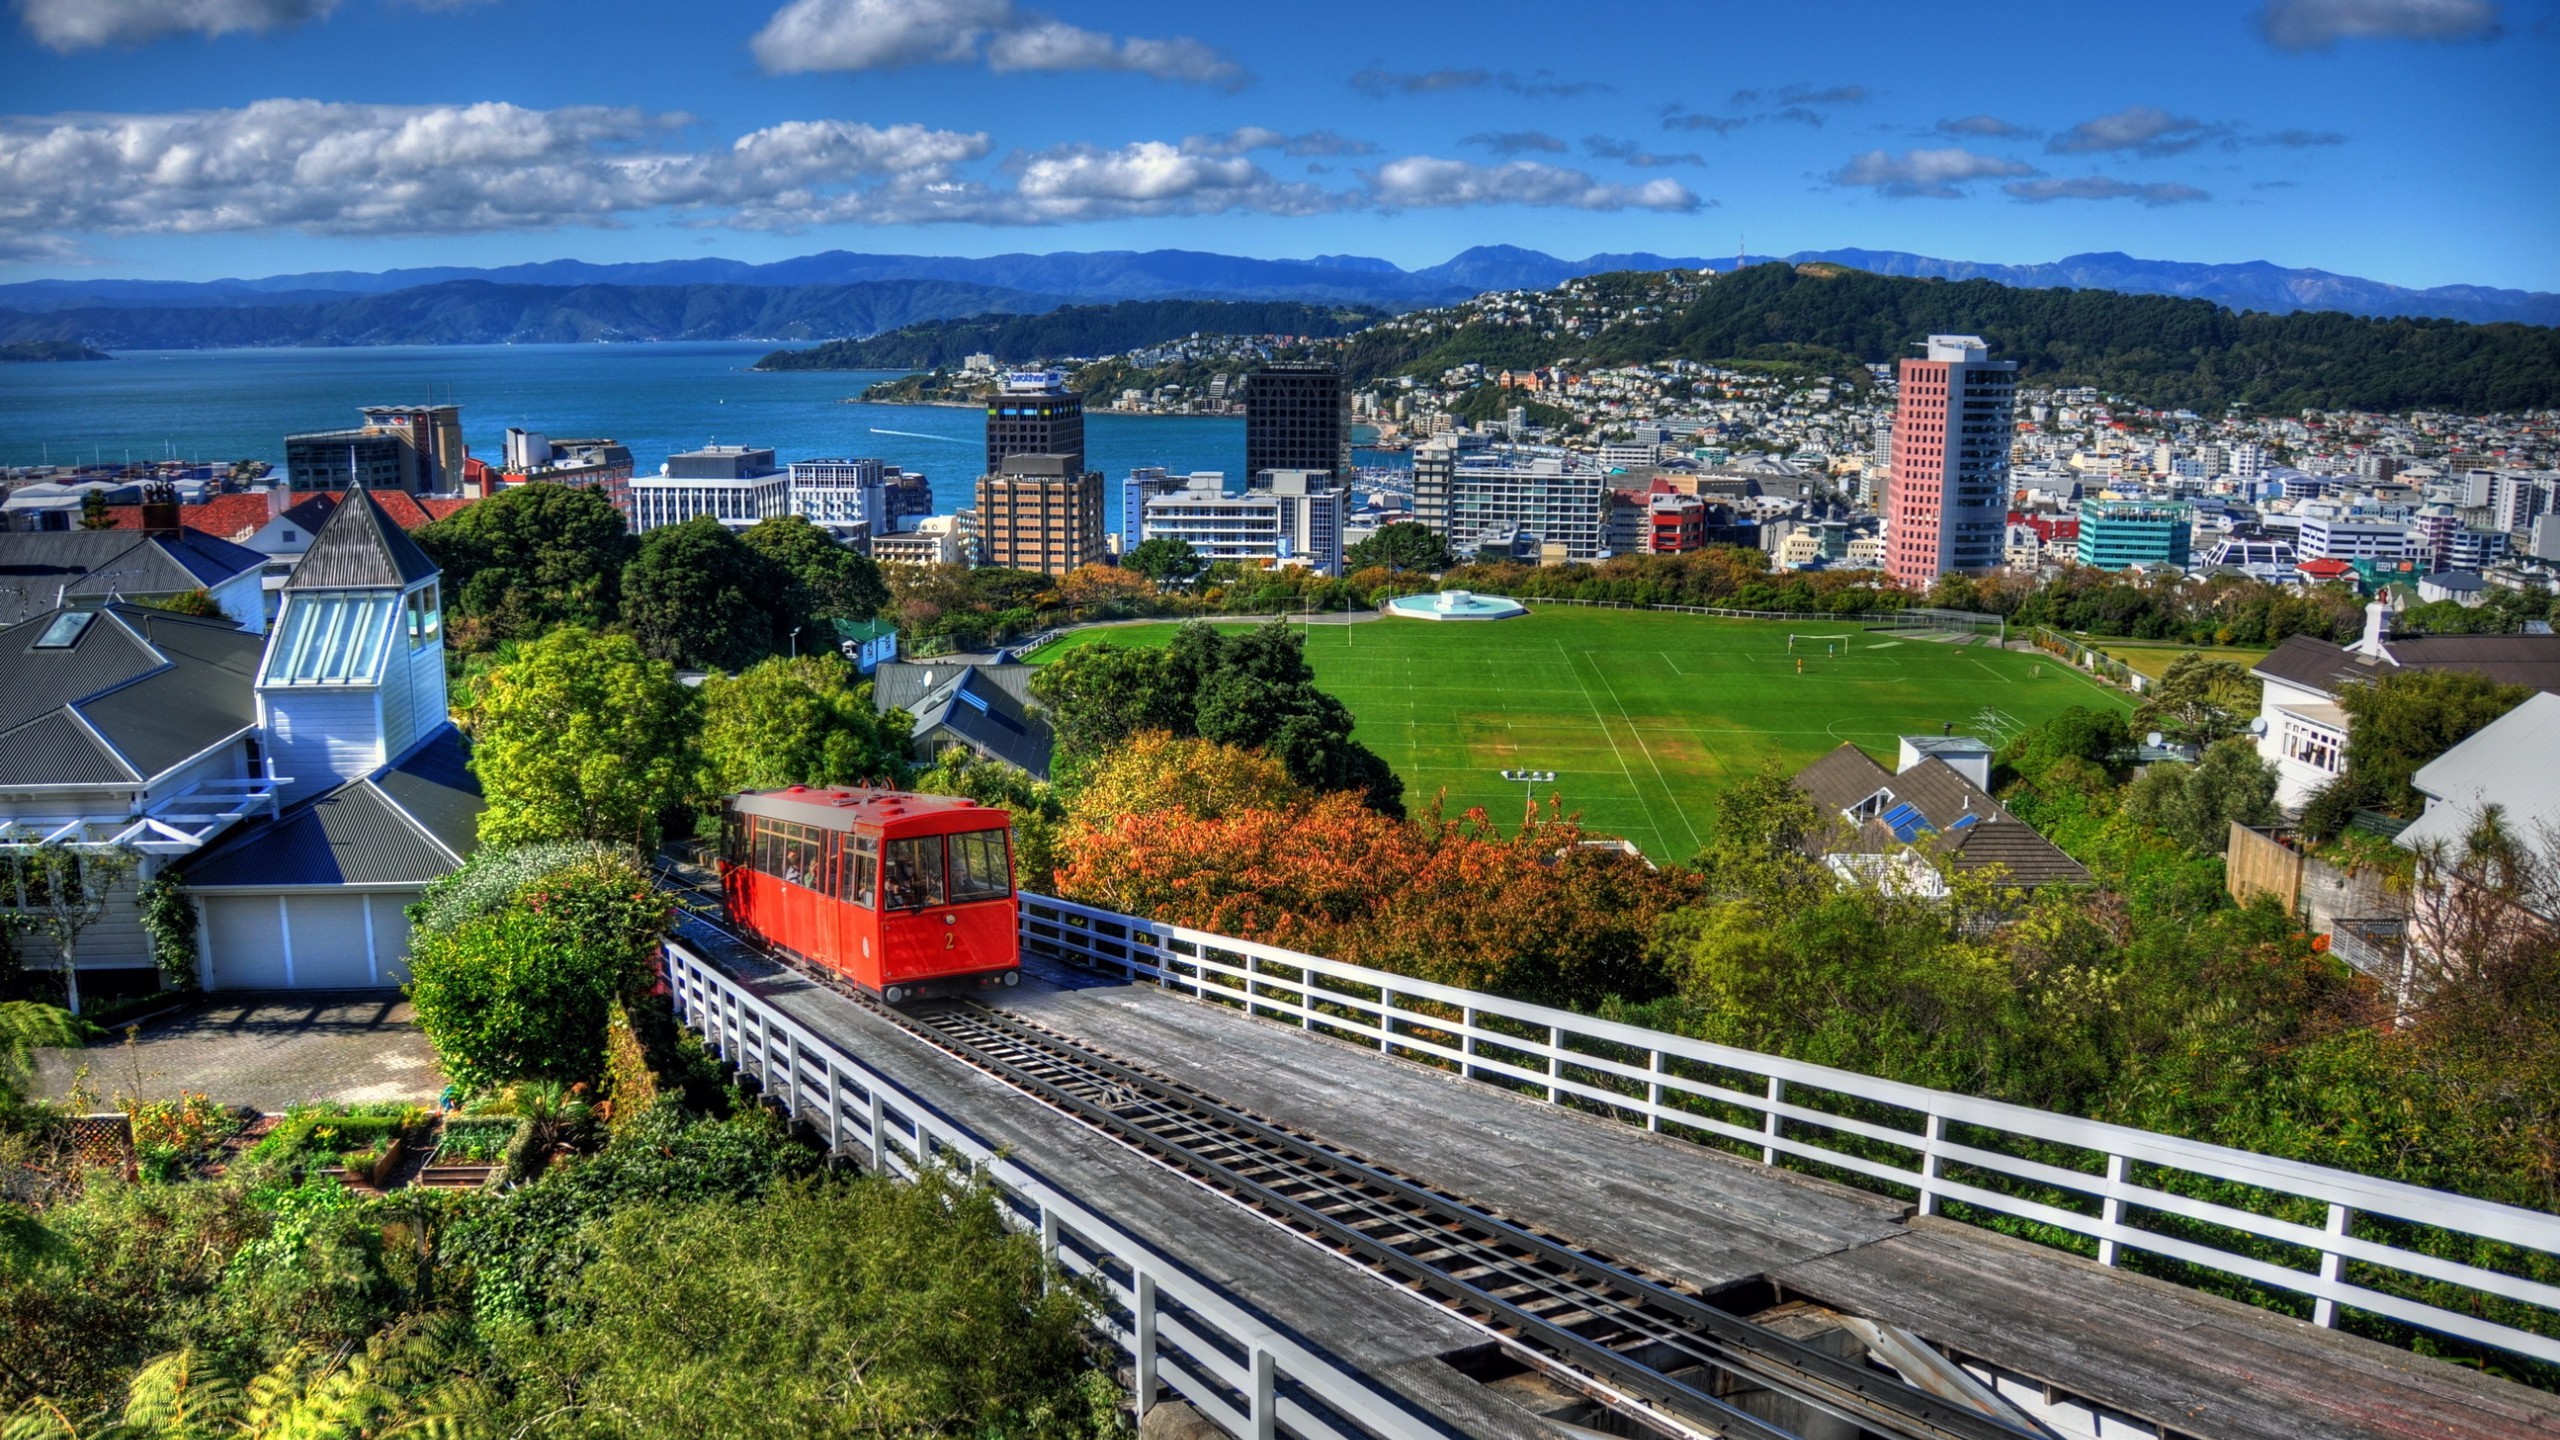 General 2560x1440 architecture building Wellington New Zealand city cityscape train hills soccer field clouds house trees sea railway grass vehicle